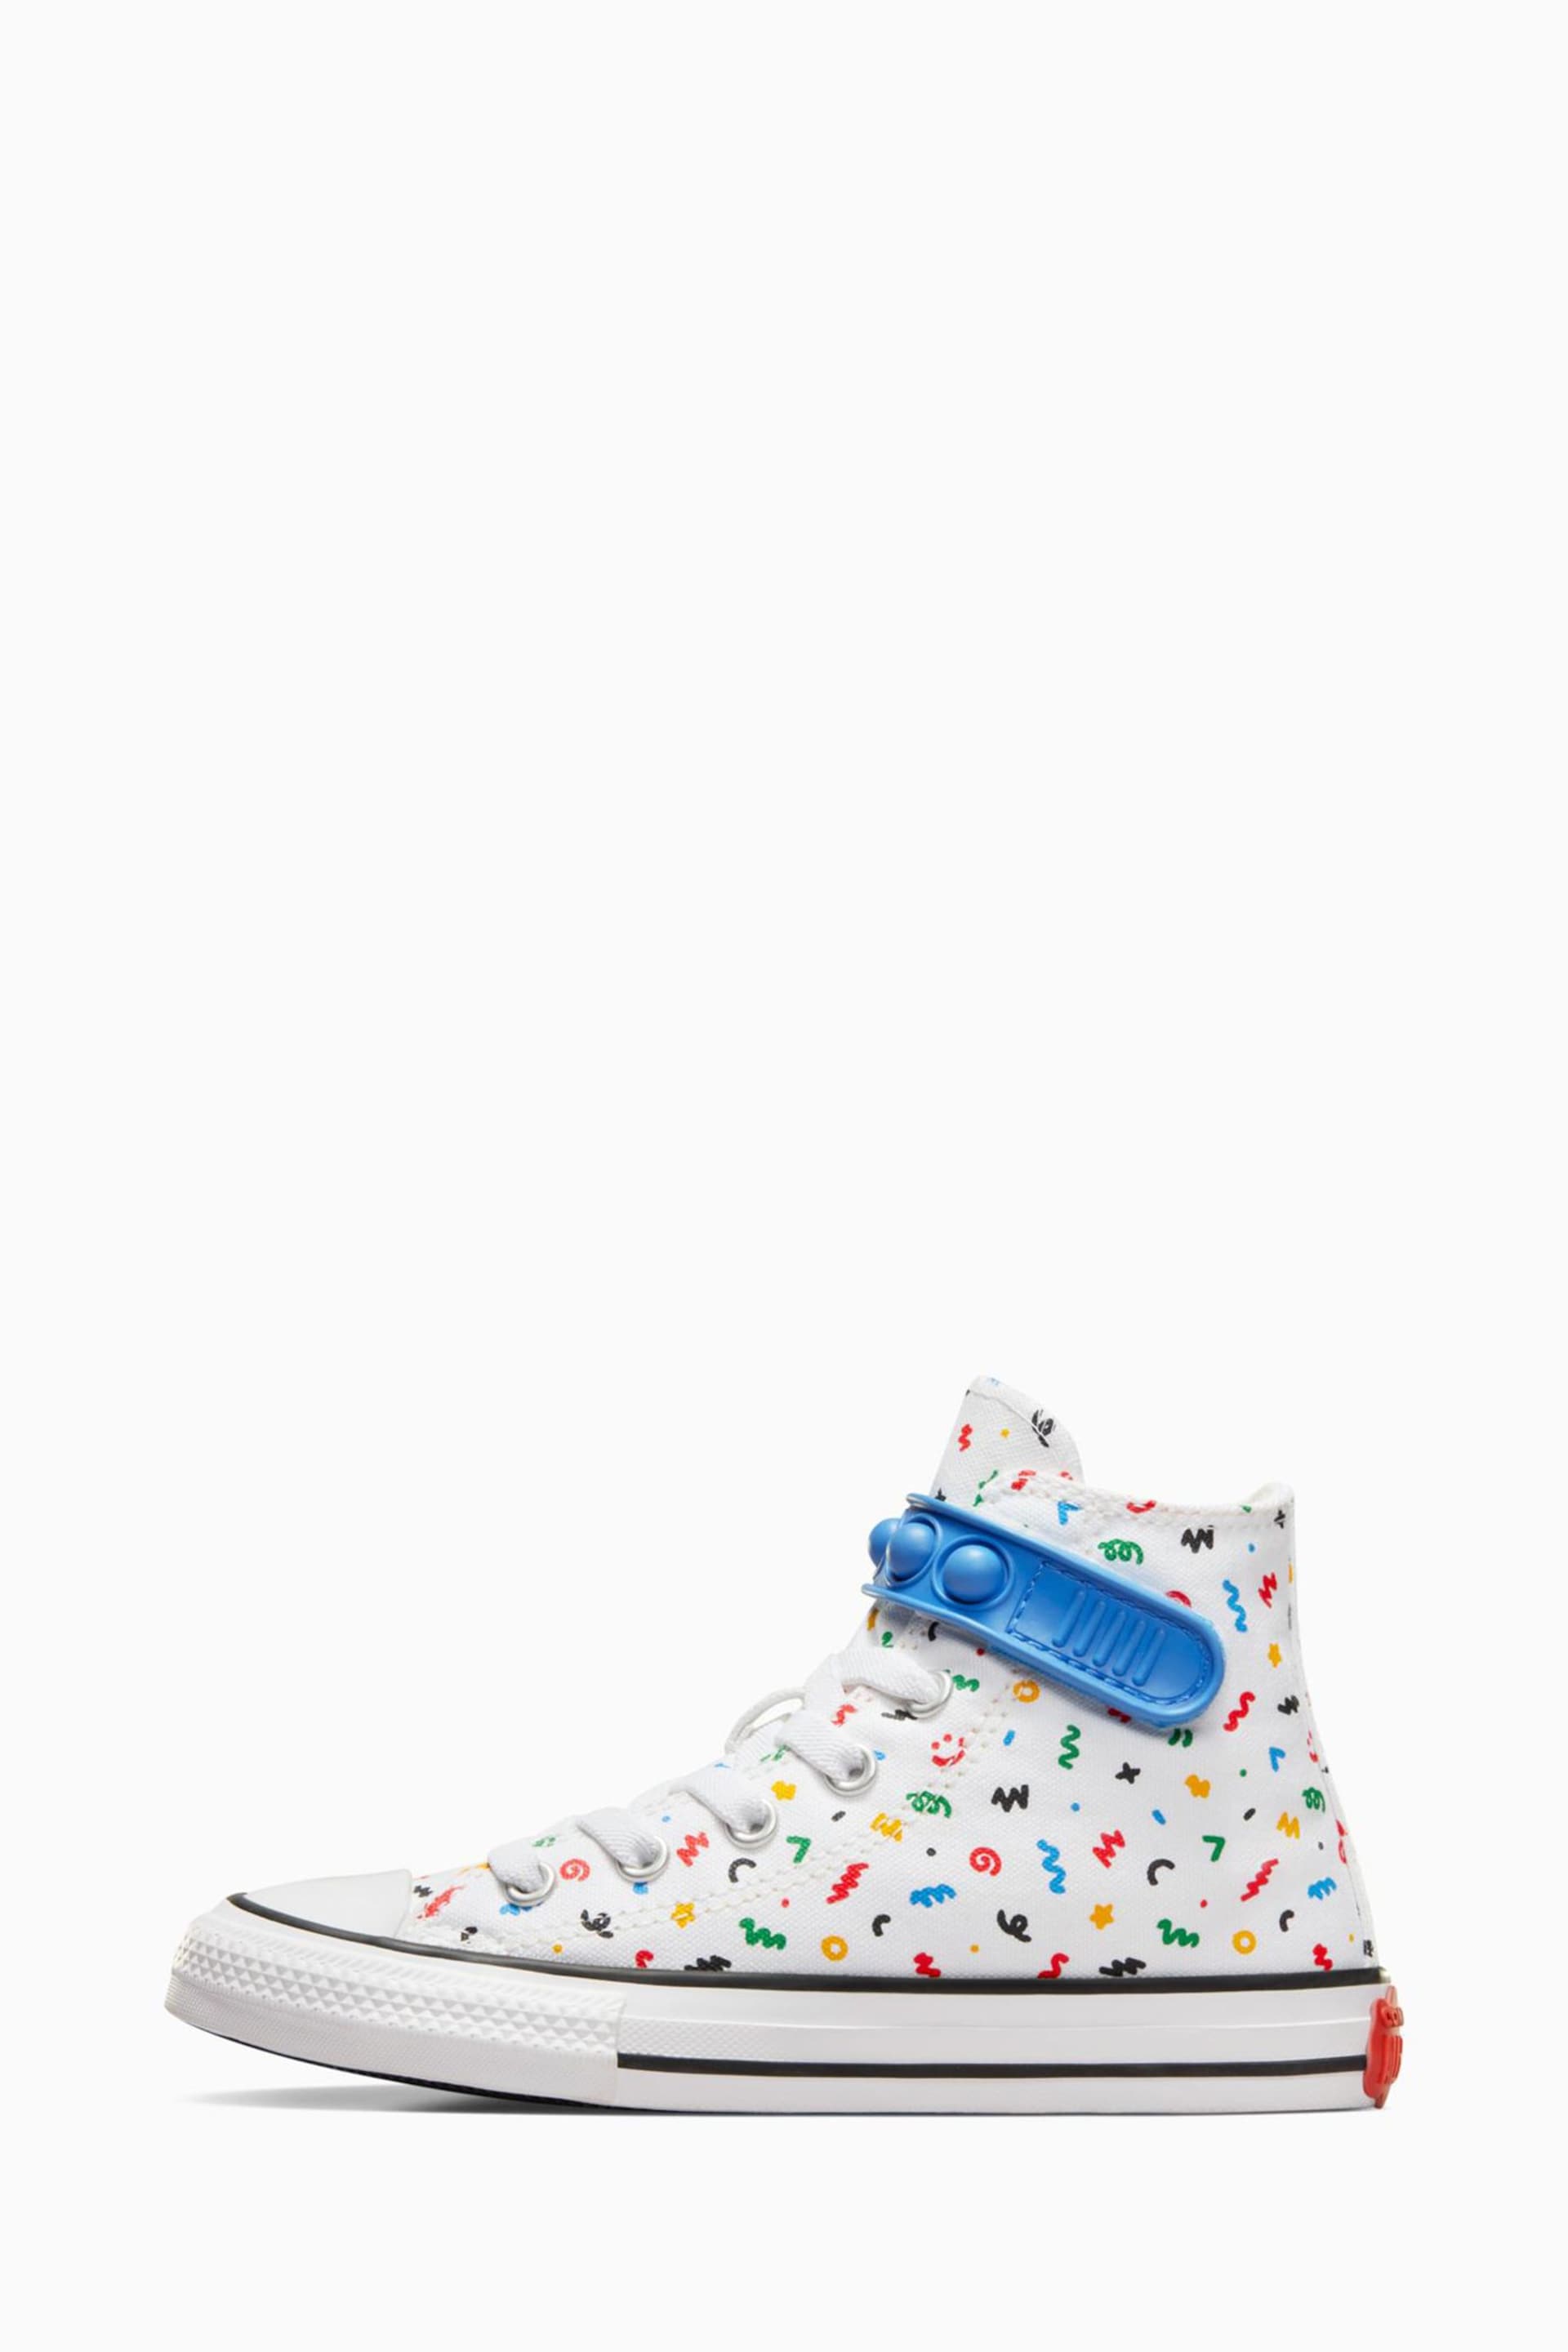 Converse White/Blue Chuck Taylor All-Star Bubble Strap 1V Trainers - Image 5 of 18